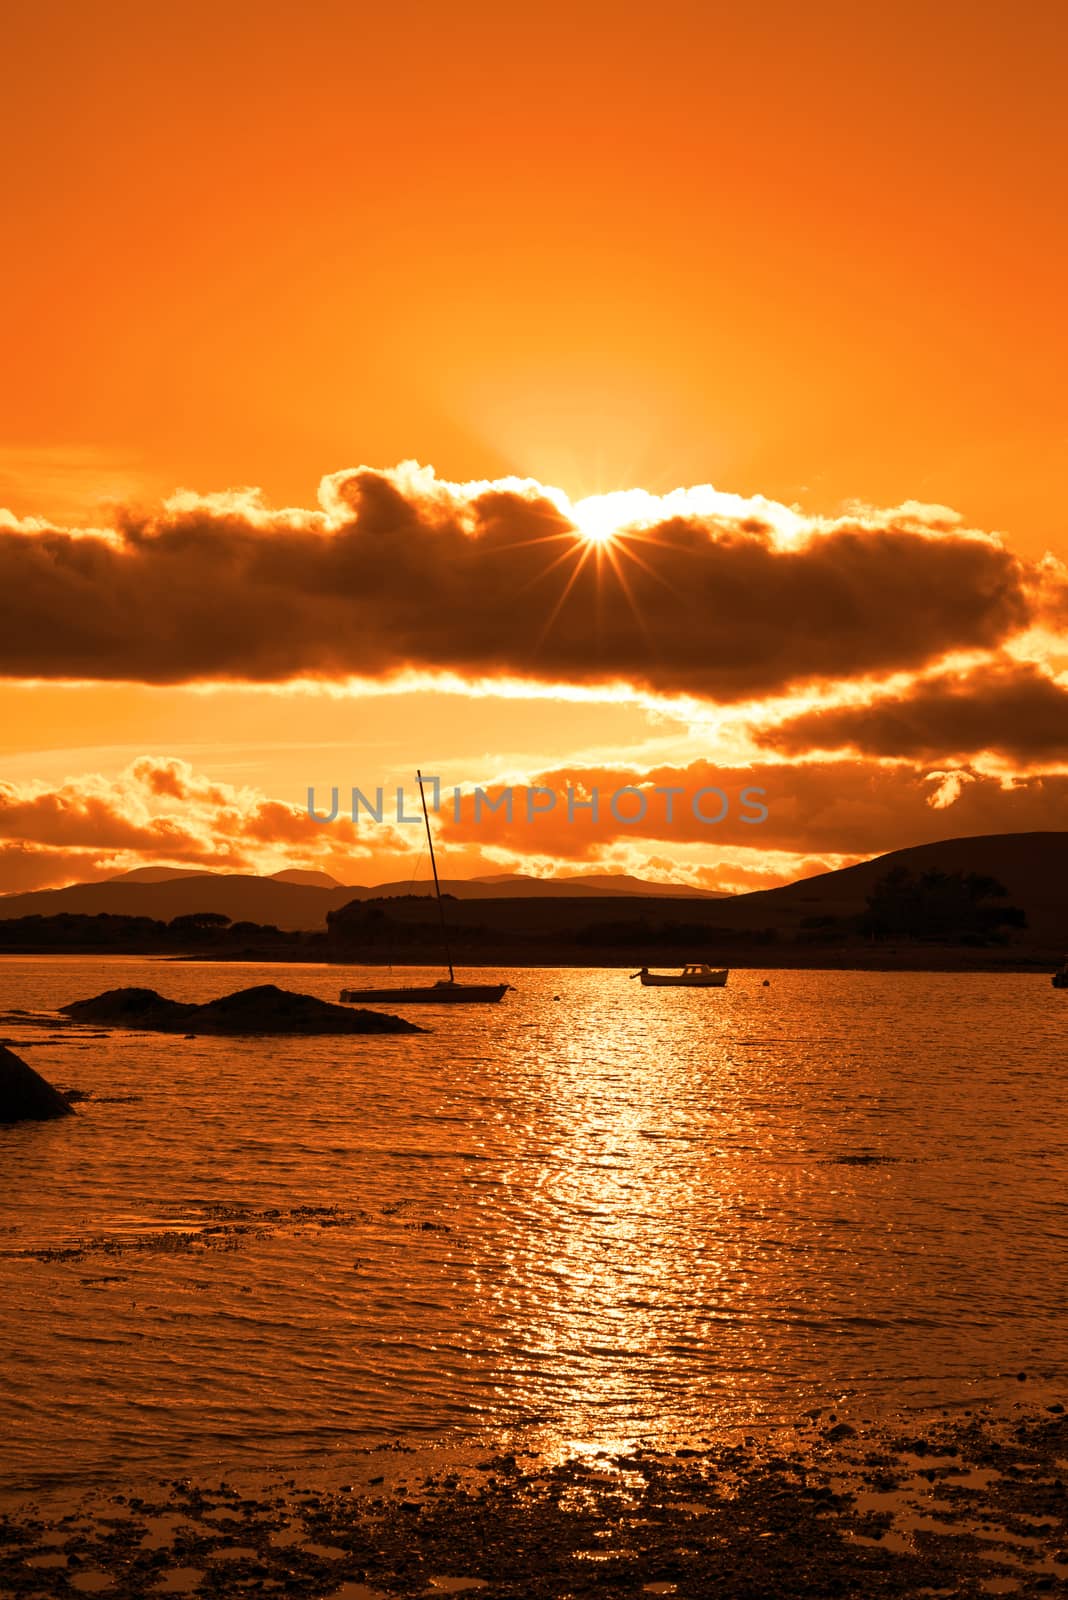 boats in a quiet bay near kenmare on the wild atlantic way ireland with an orange sunset